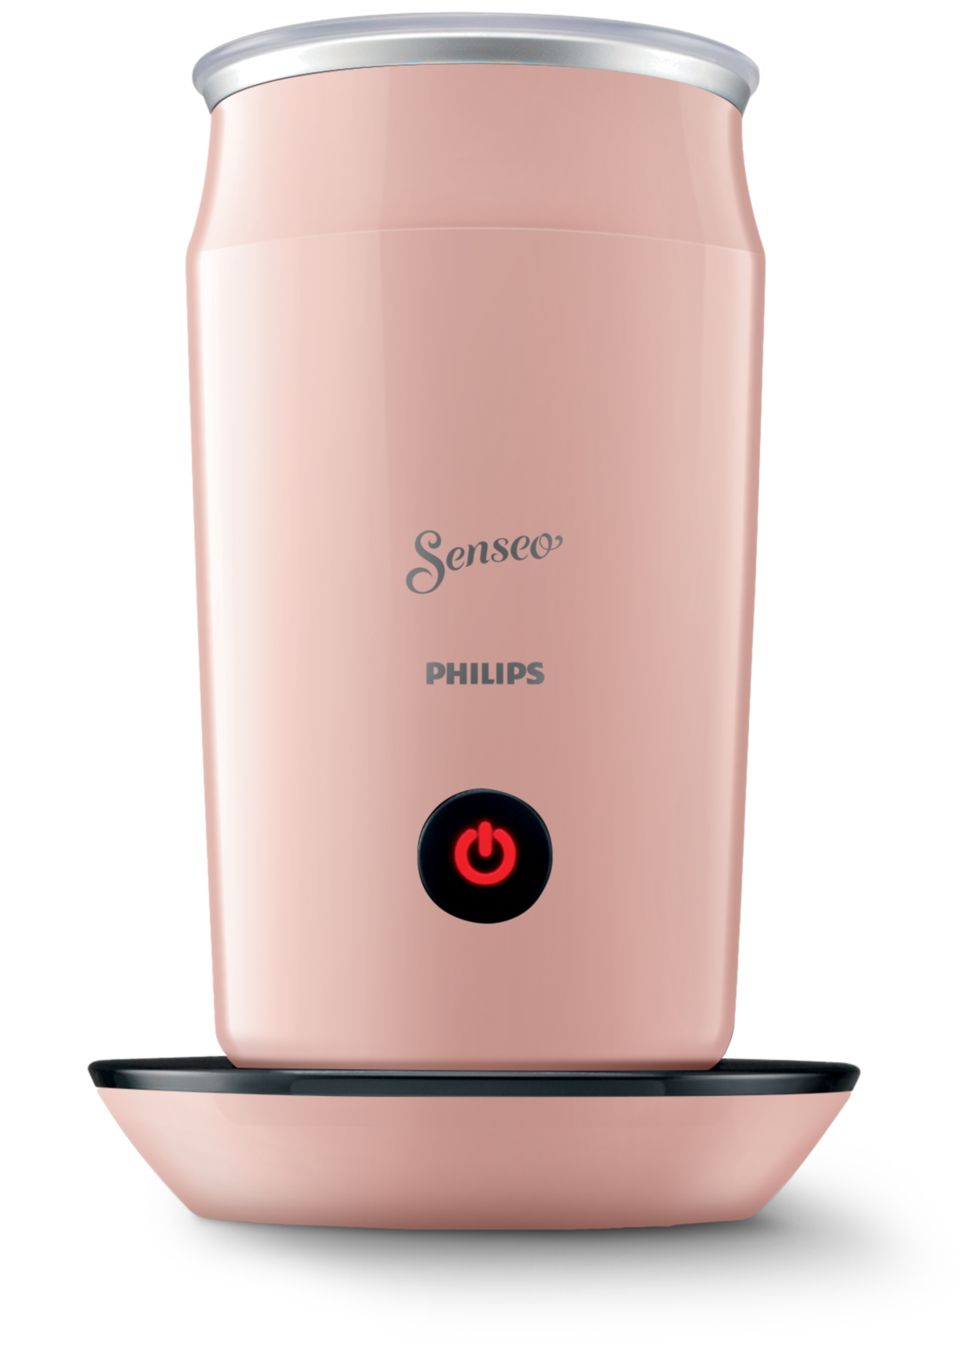 https://images.philips.com/is/image/philipsconsumer/d76bed0a4b2a49e89b9dad2501035d2d?$jpglarge$&wid=960